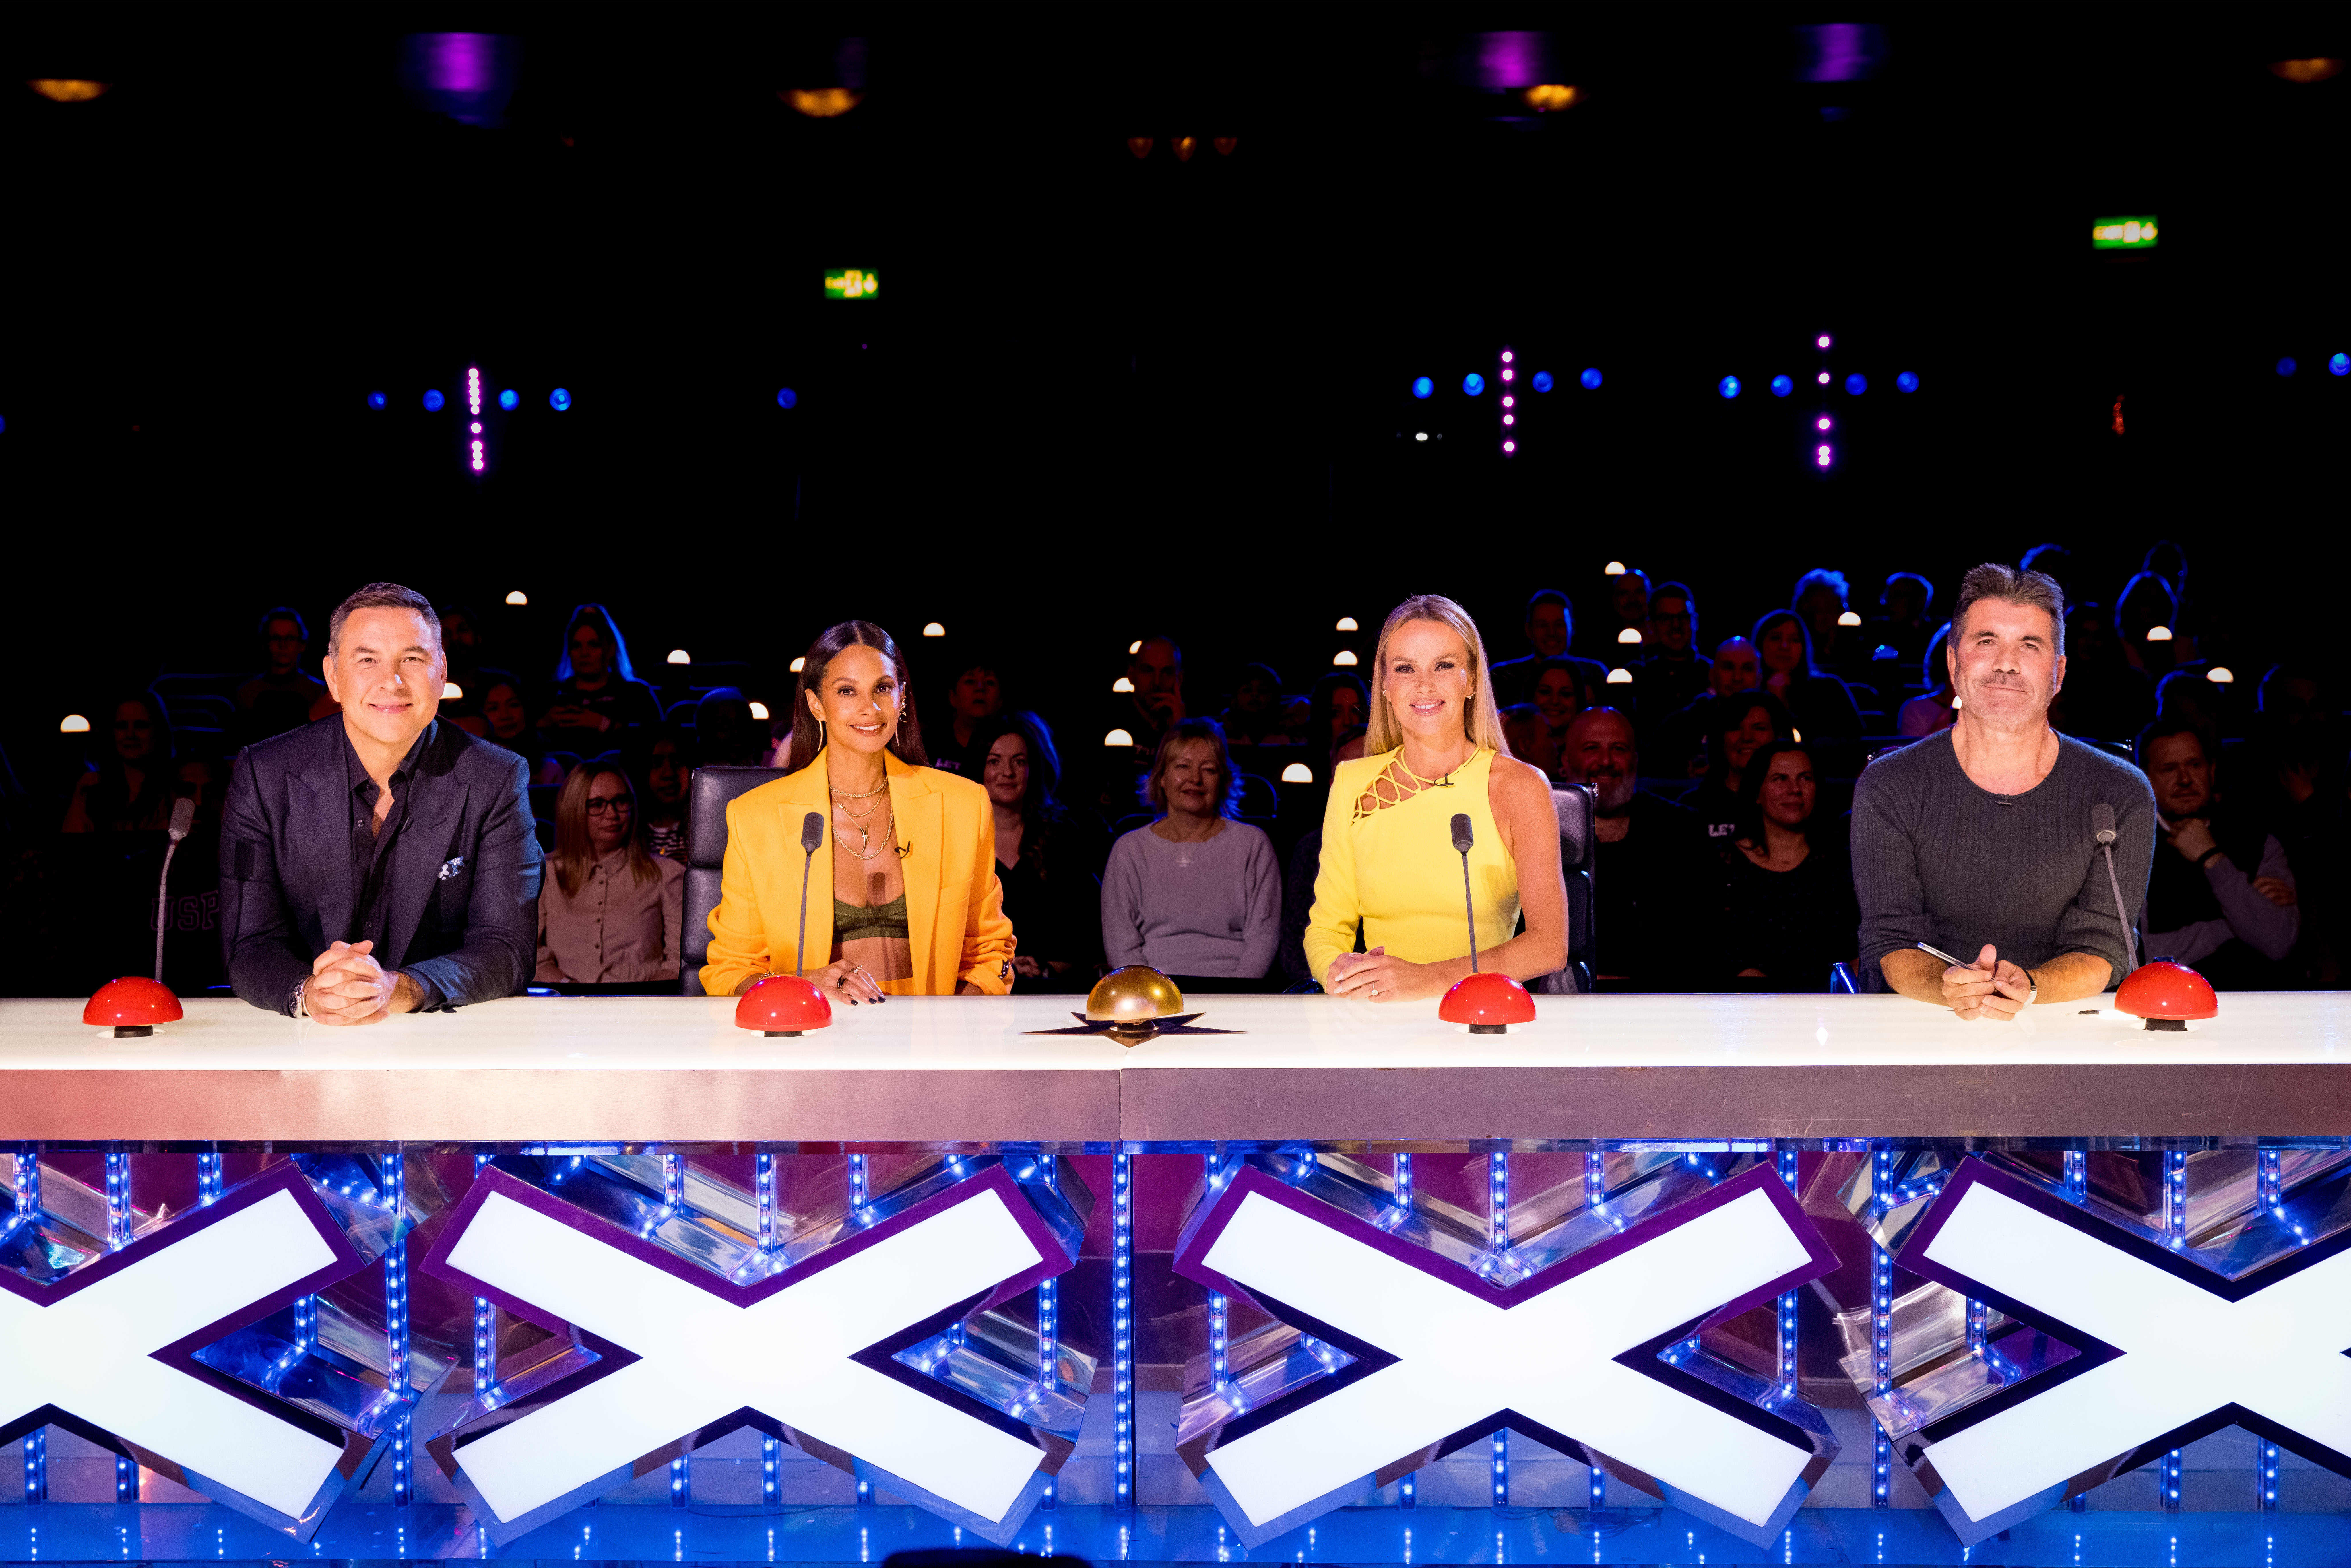 TV tonight The judges are ready for the semifinal.